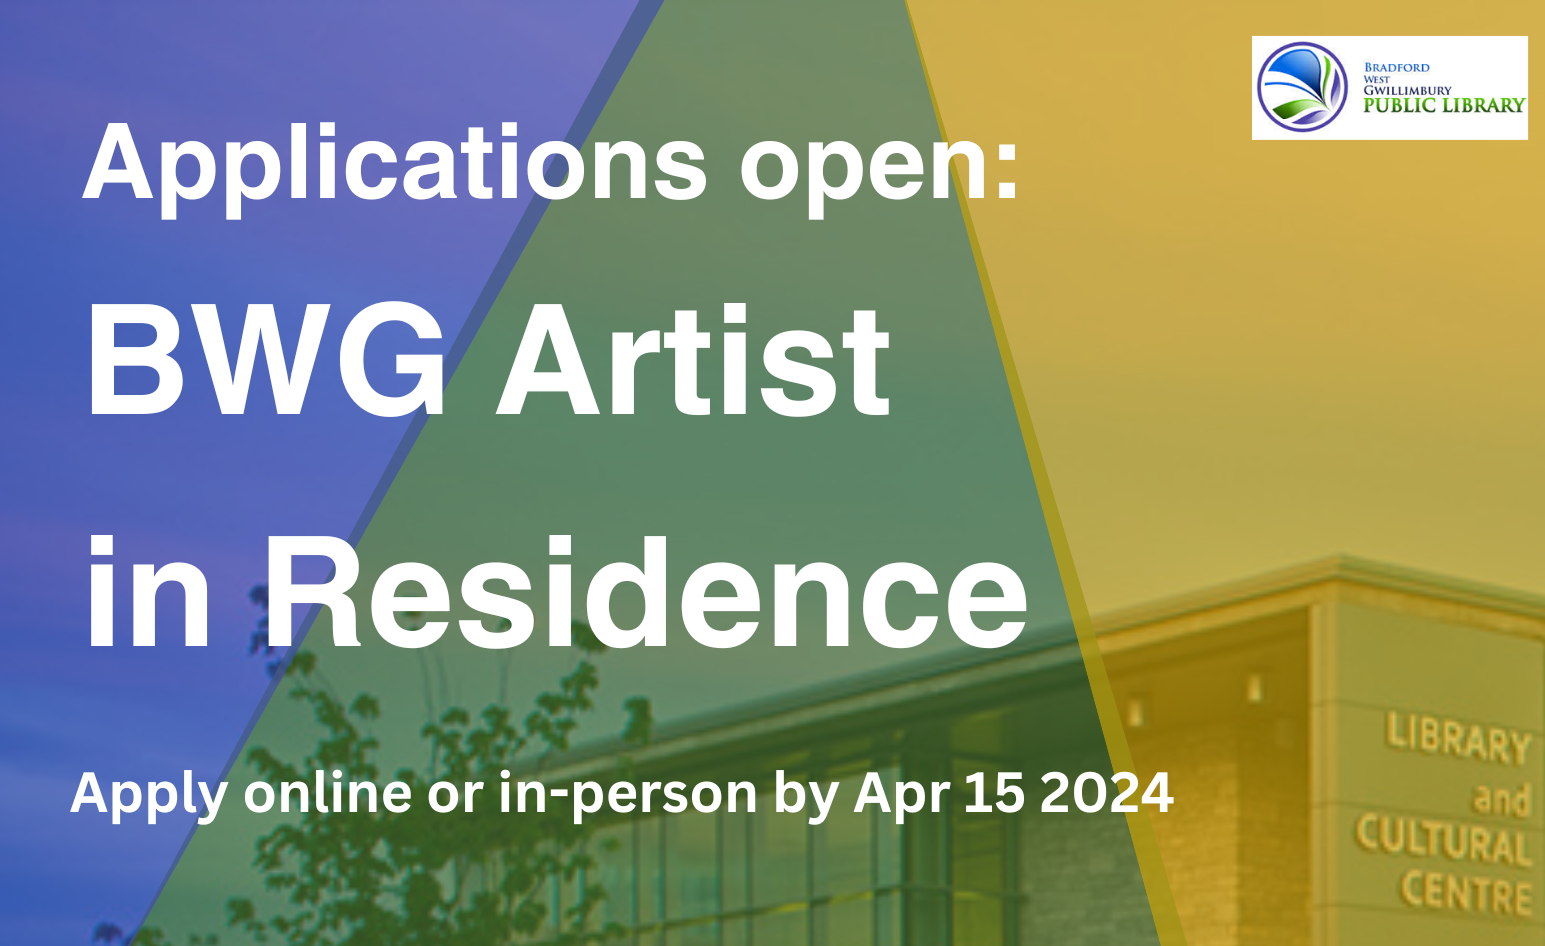 Applications open: BWG Artist in Residence. Apply online or in person by April 15, 2024. 